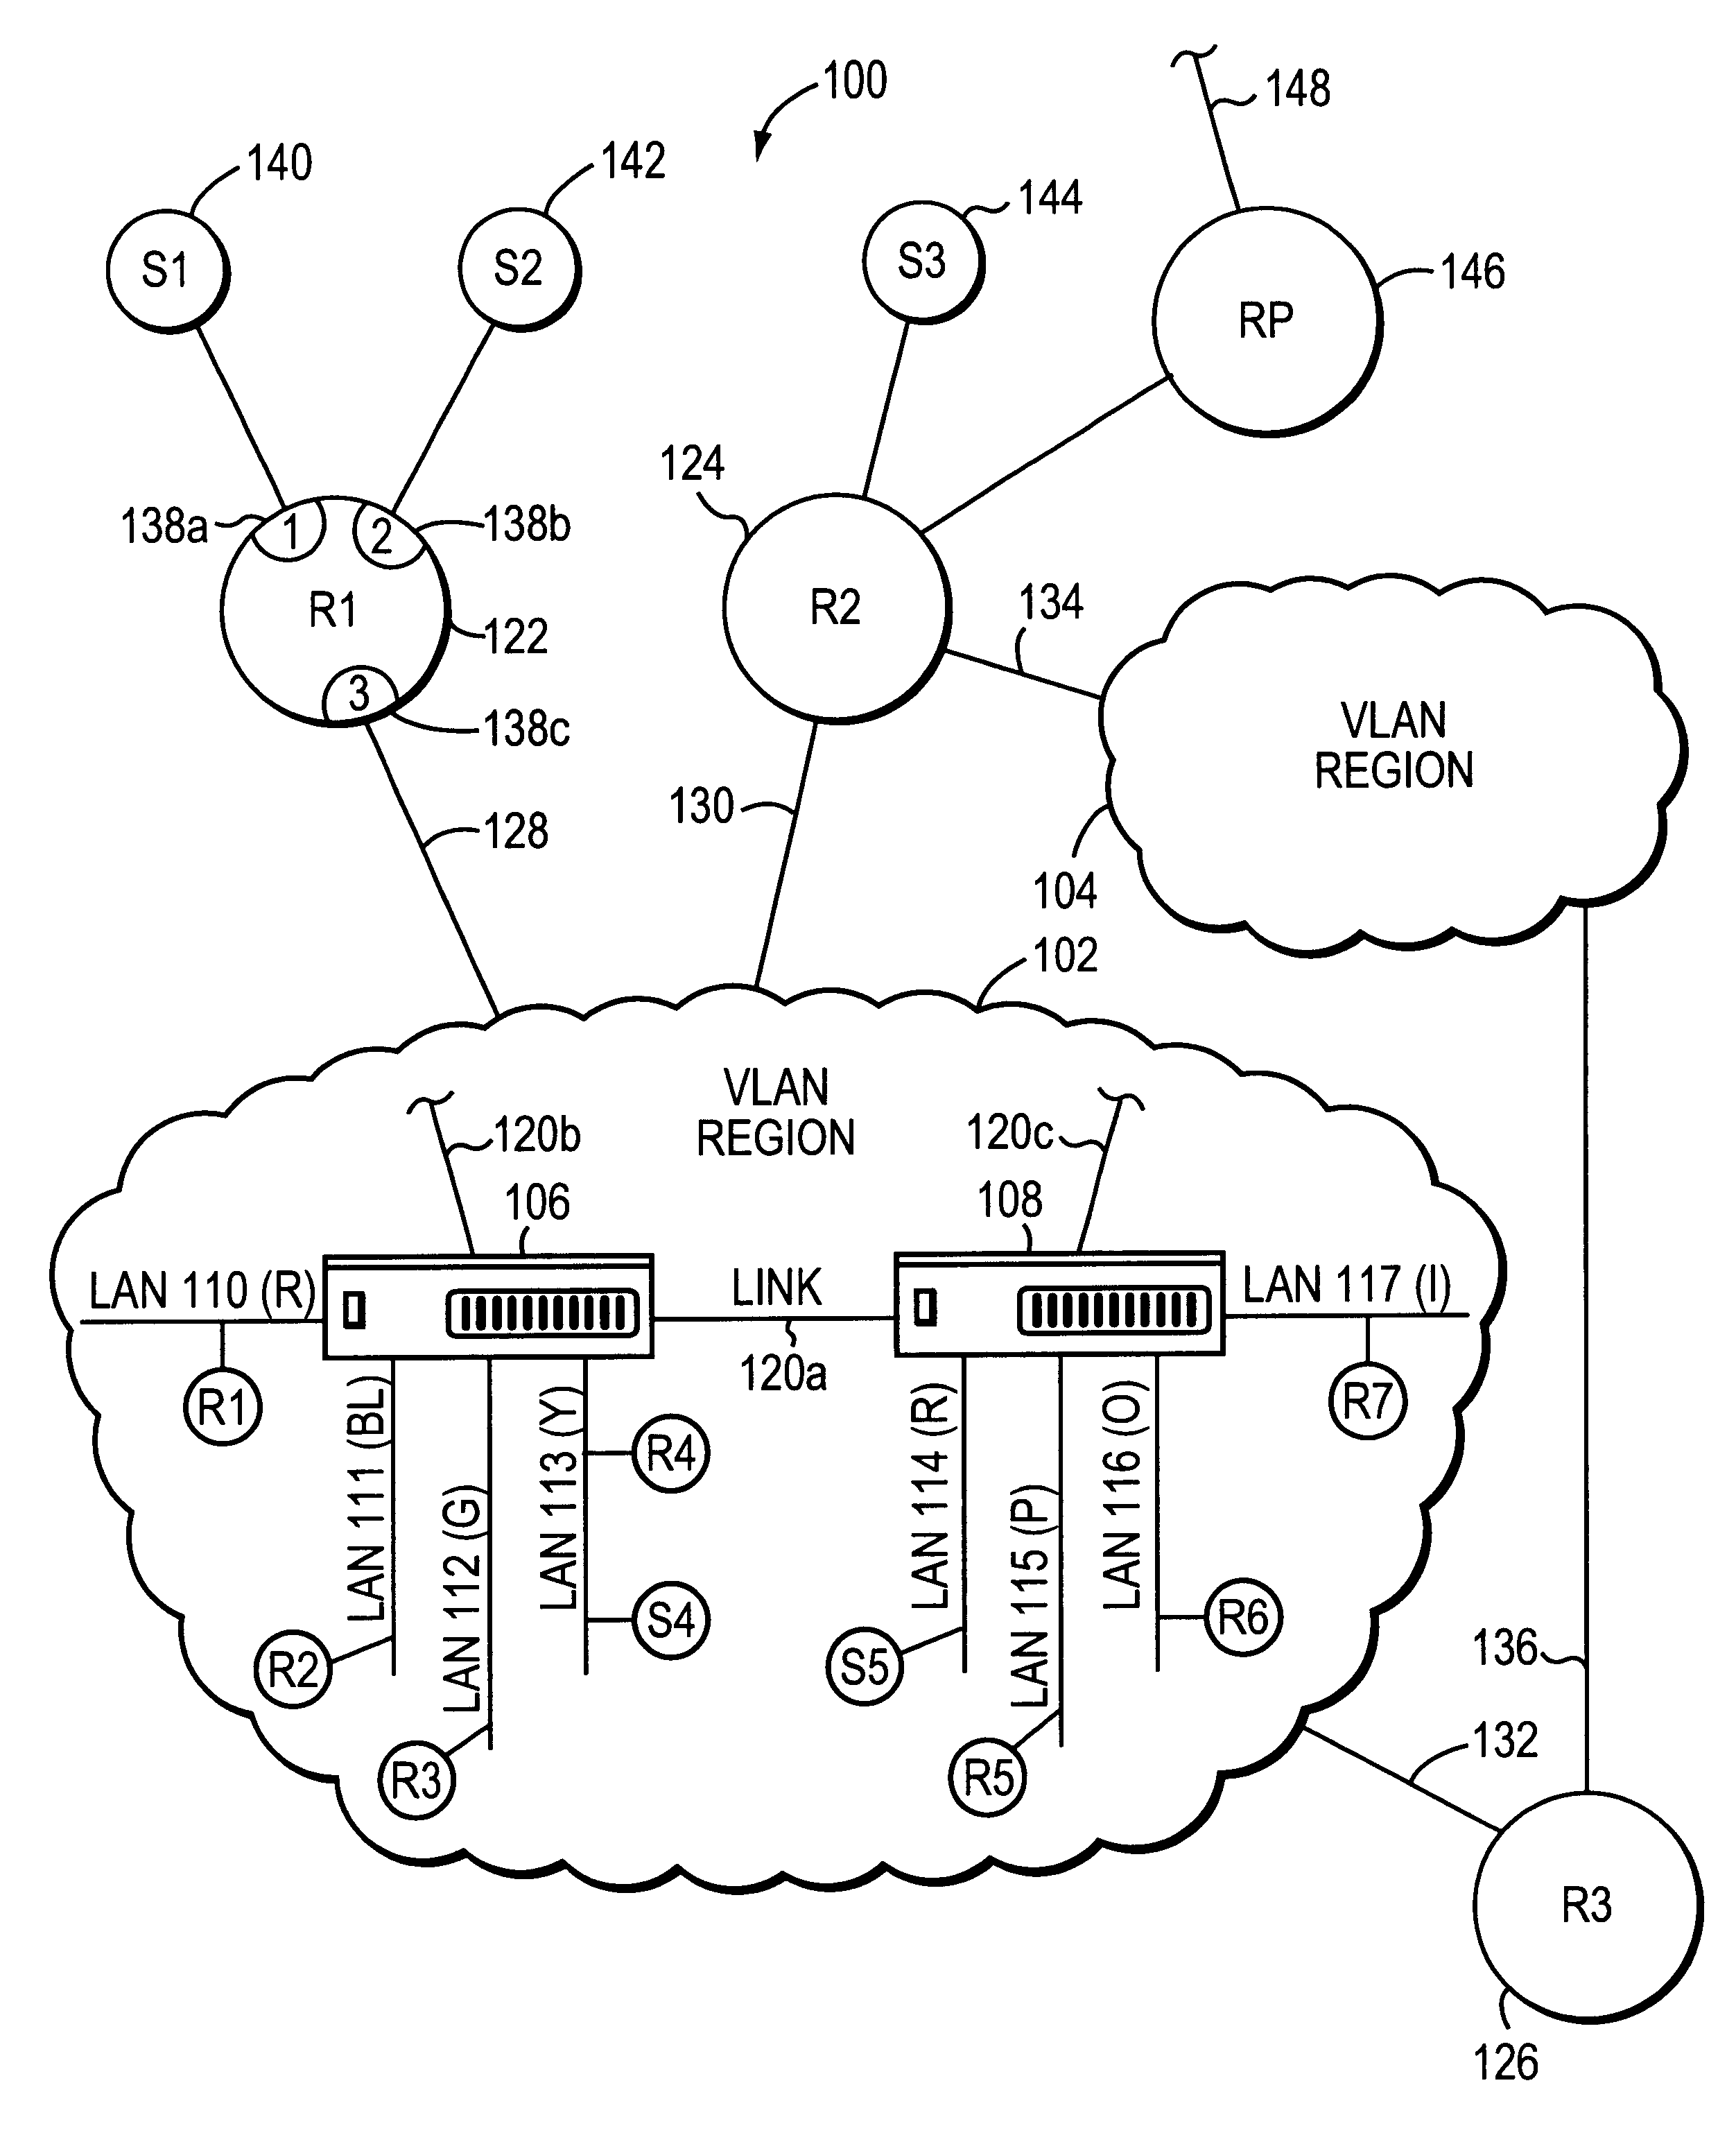 System and method for distributing multicasts in virtual local area networks